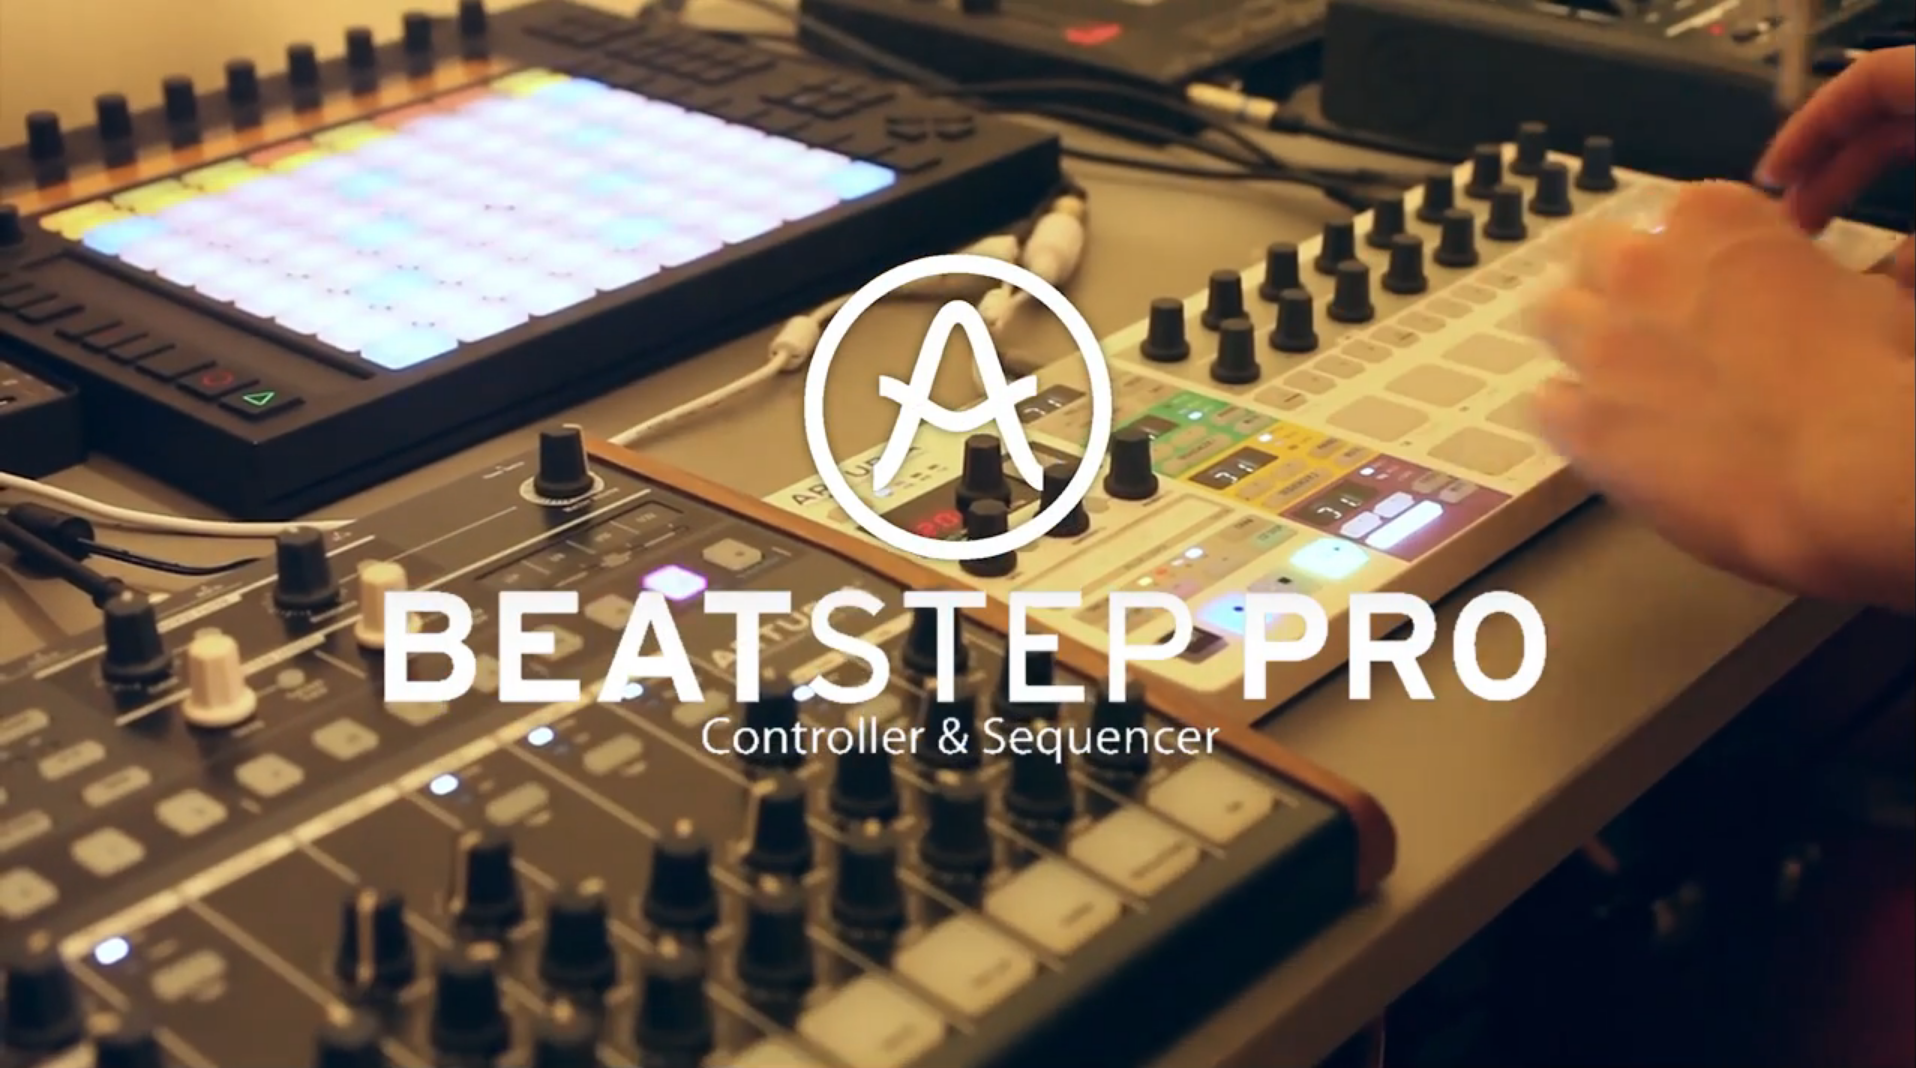 Arturia Beatstep Pro: step sequencer / controller review and hands